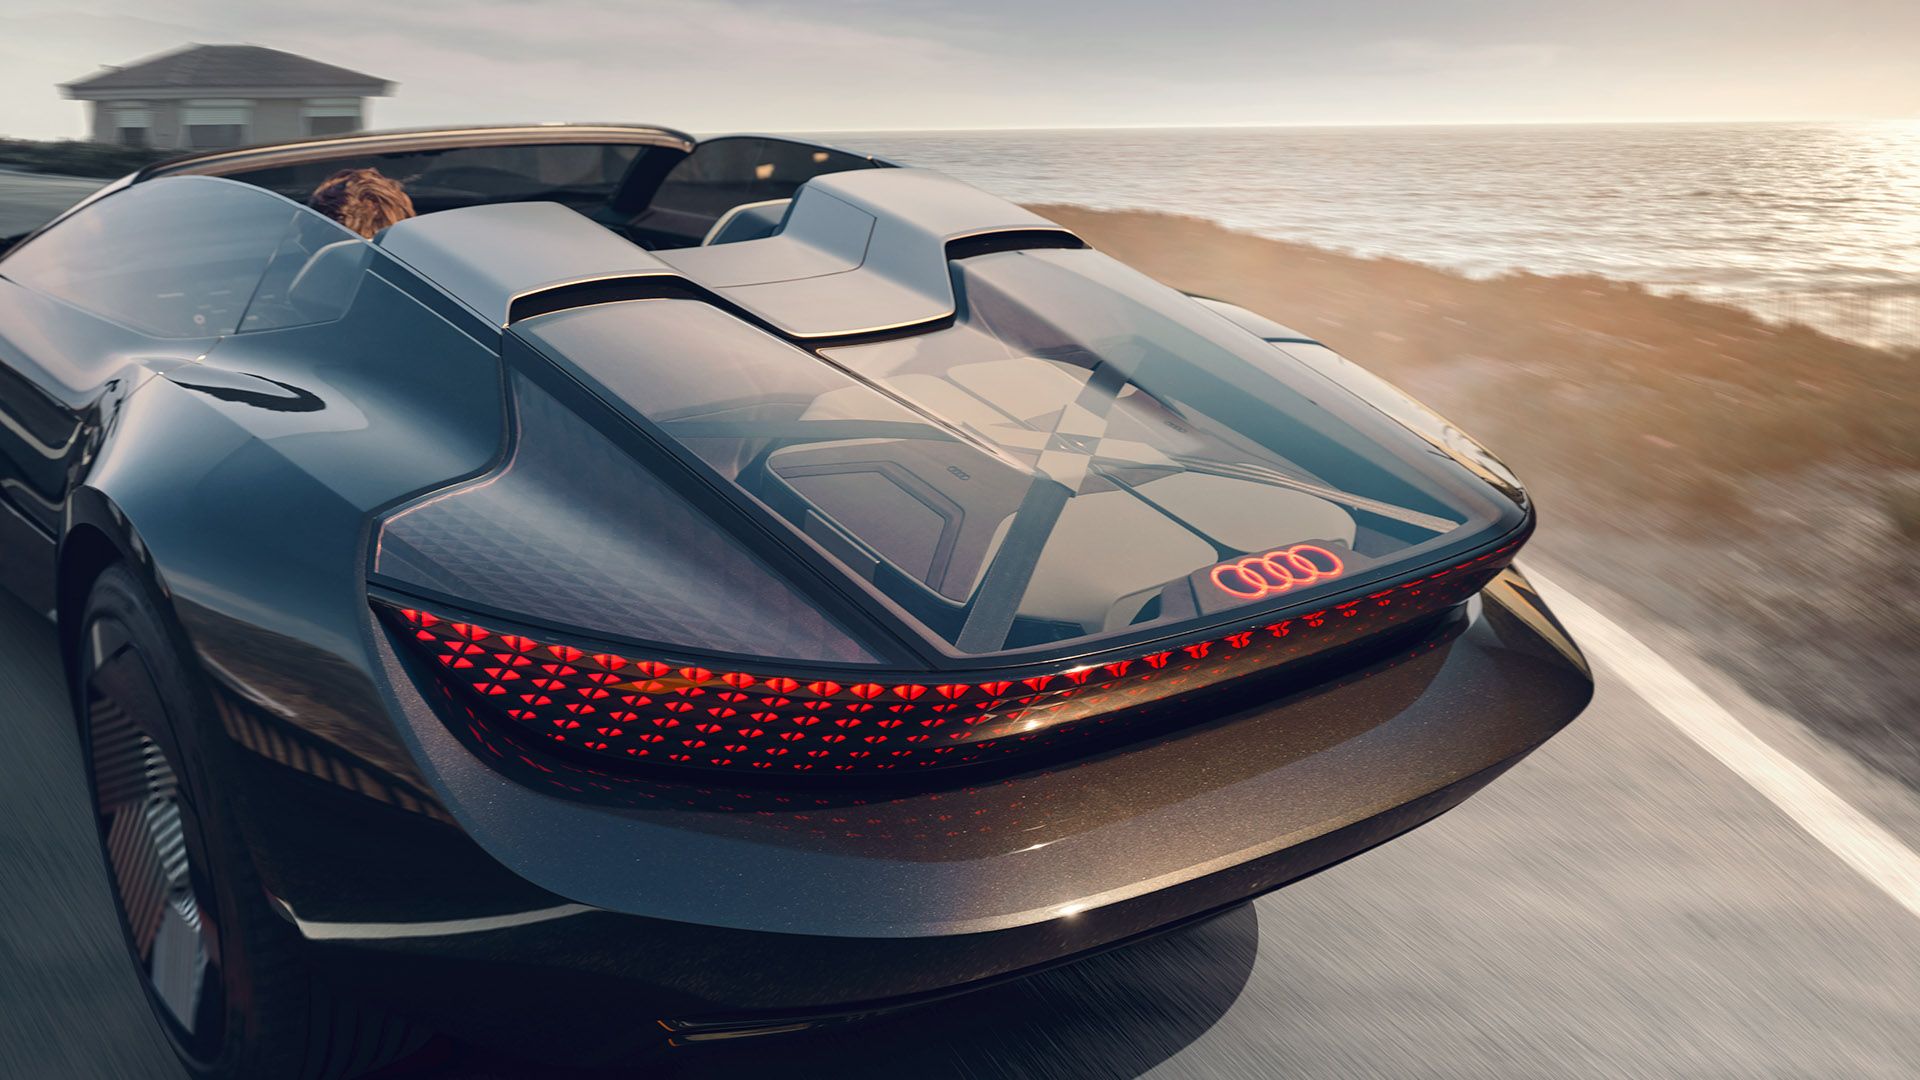 A slightly elevated view of the rear of the Audi skysphere concept roadster.